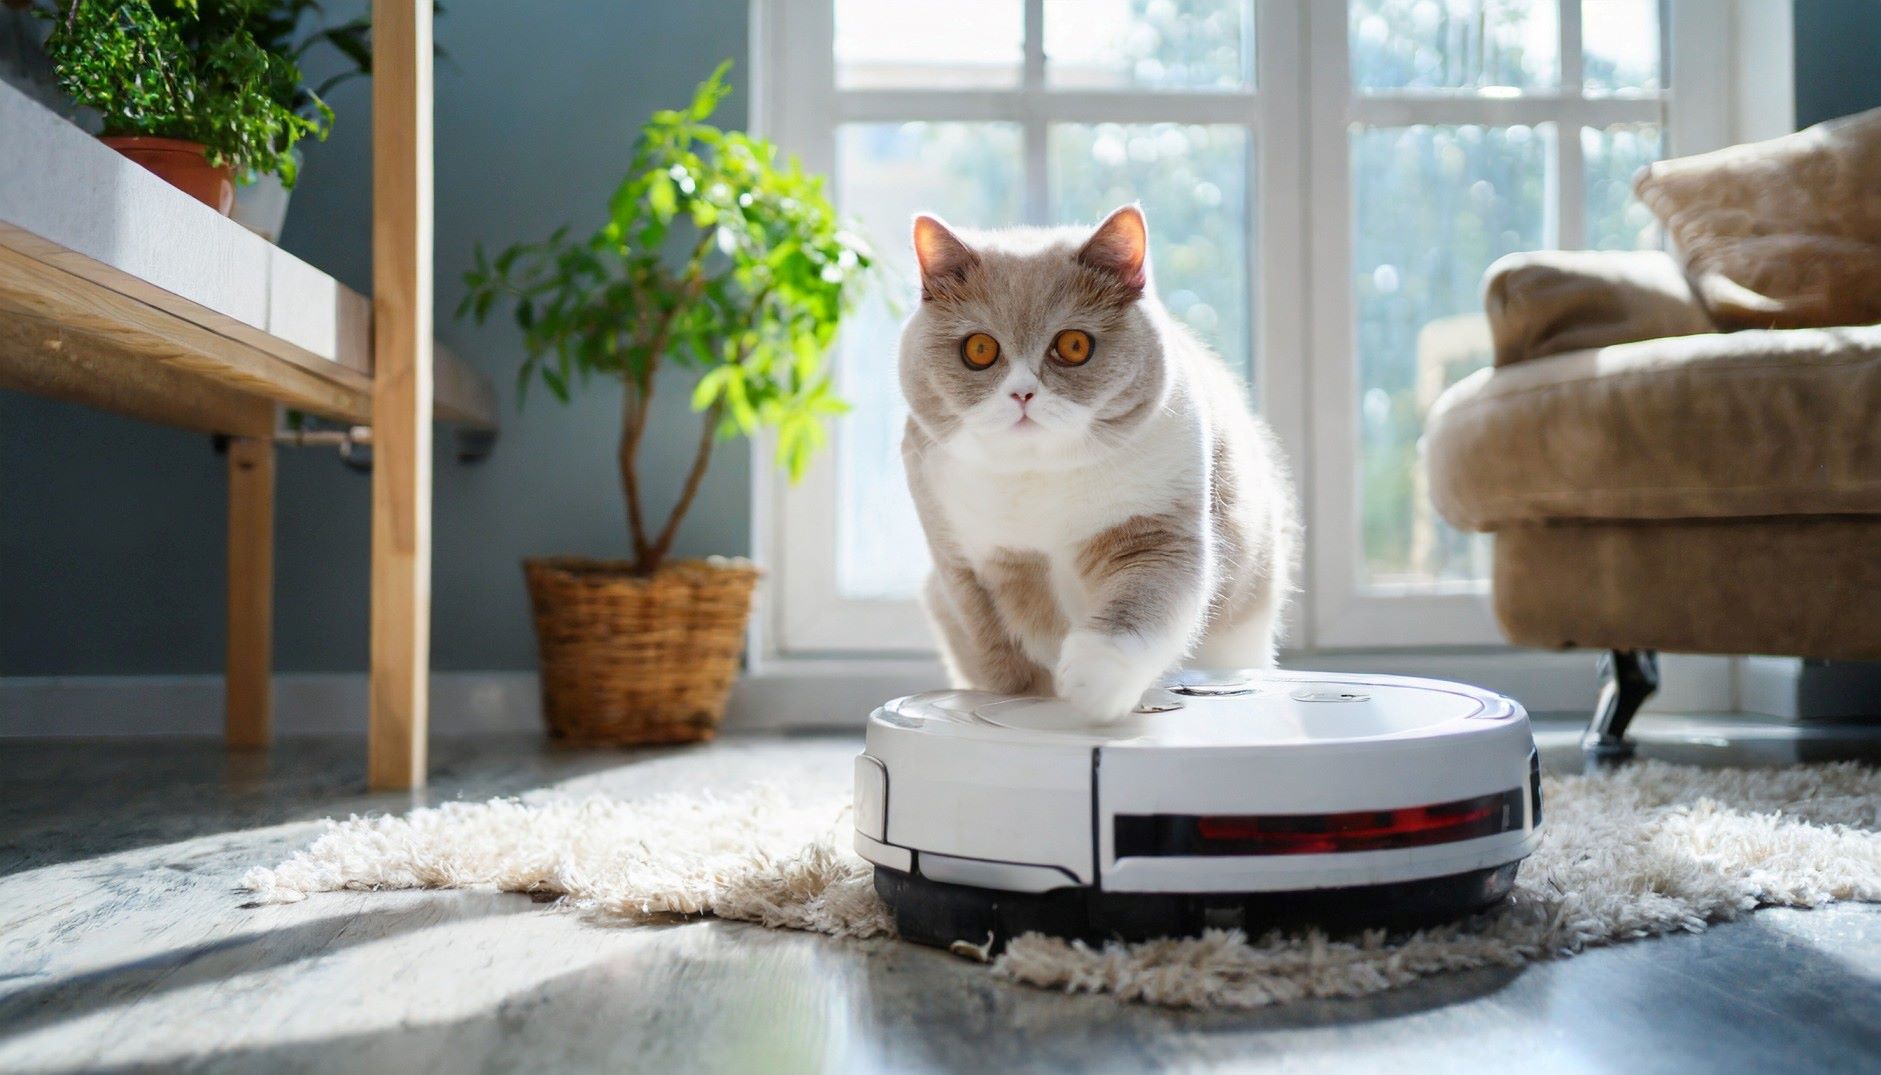 A cat sitting on a roomba indoors